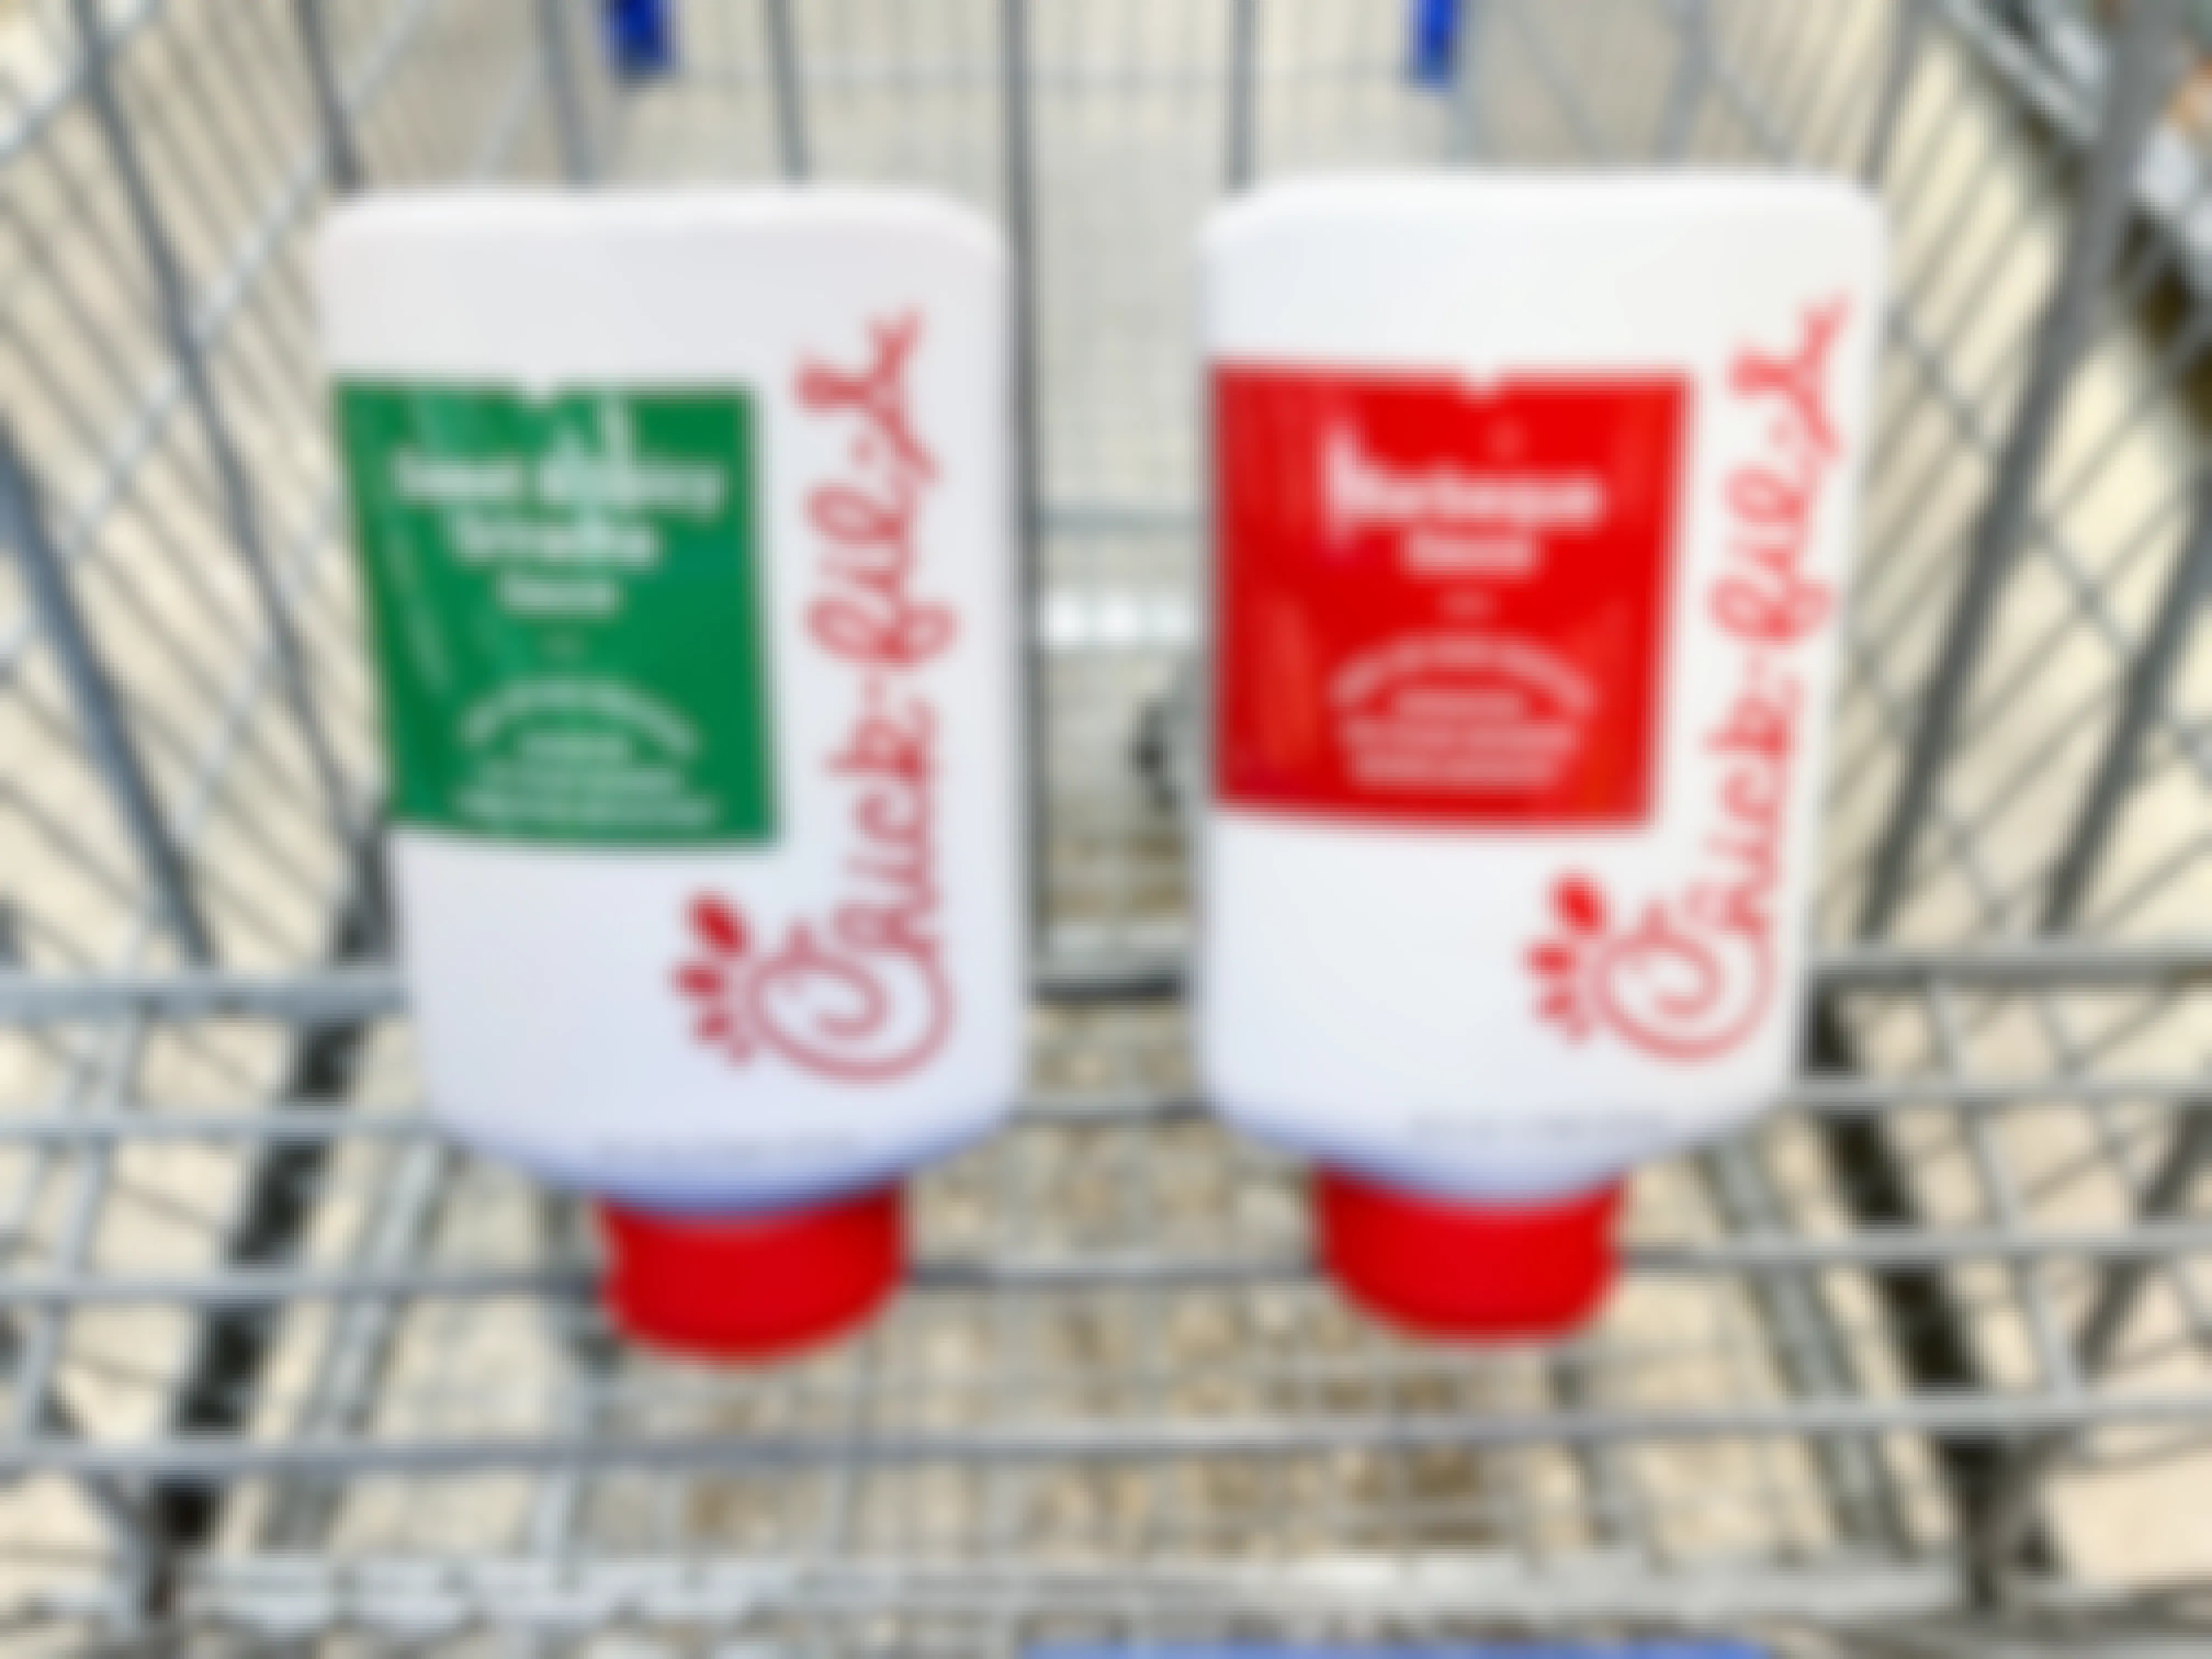 Bottles of Chick-fil-A barbeque and sweet & spicy sriracha sauce in a Walmart cart